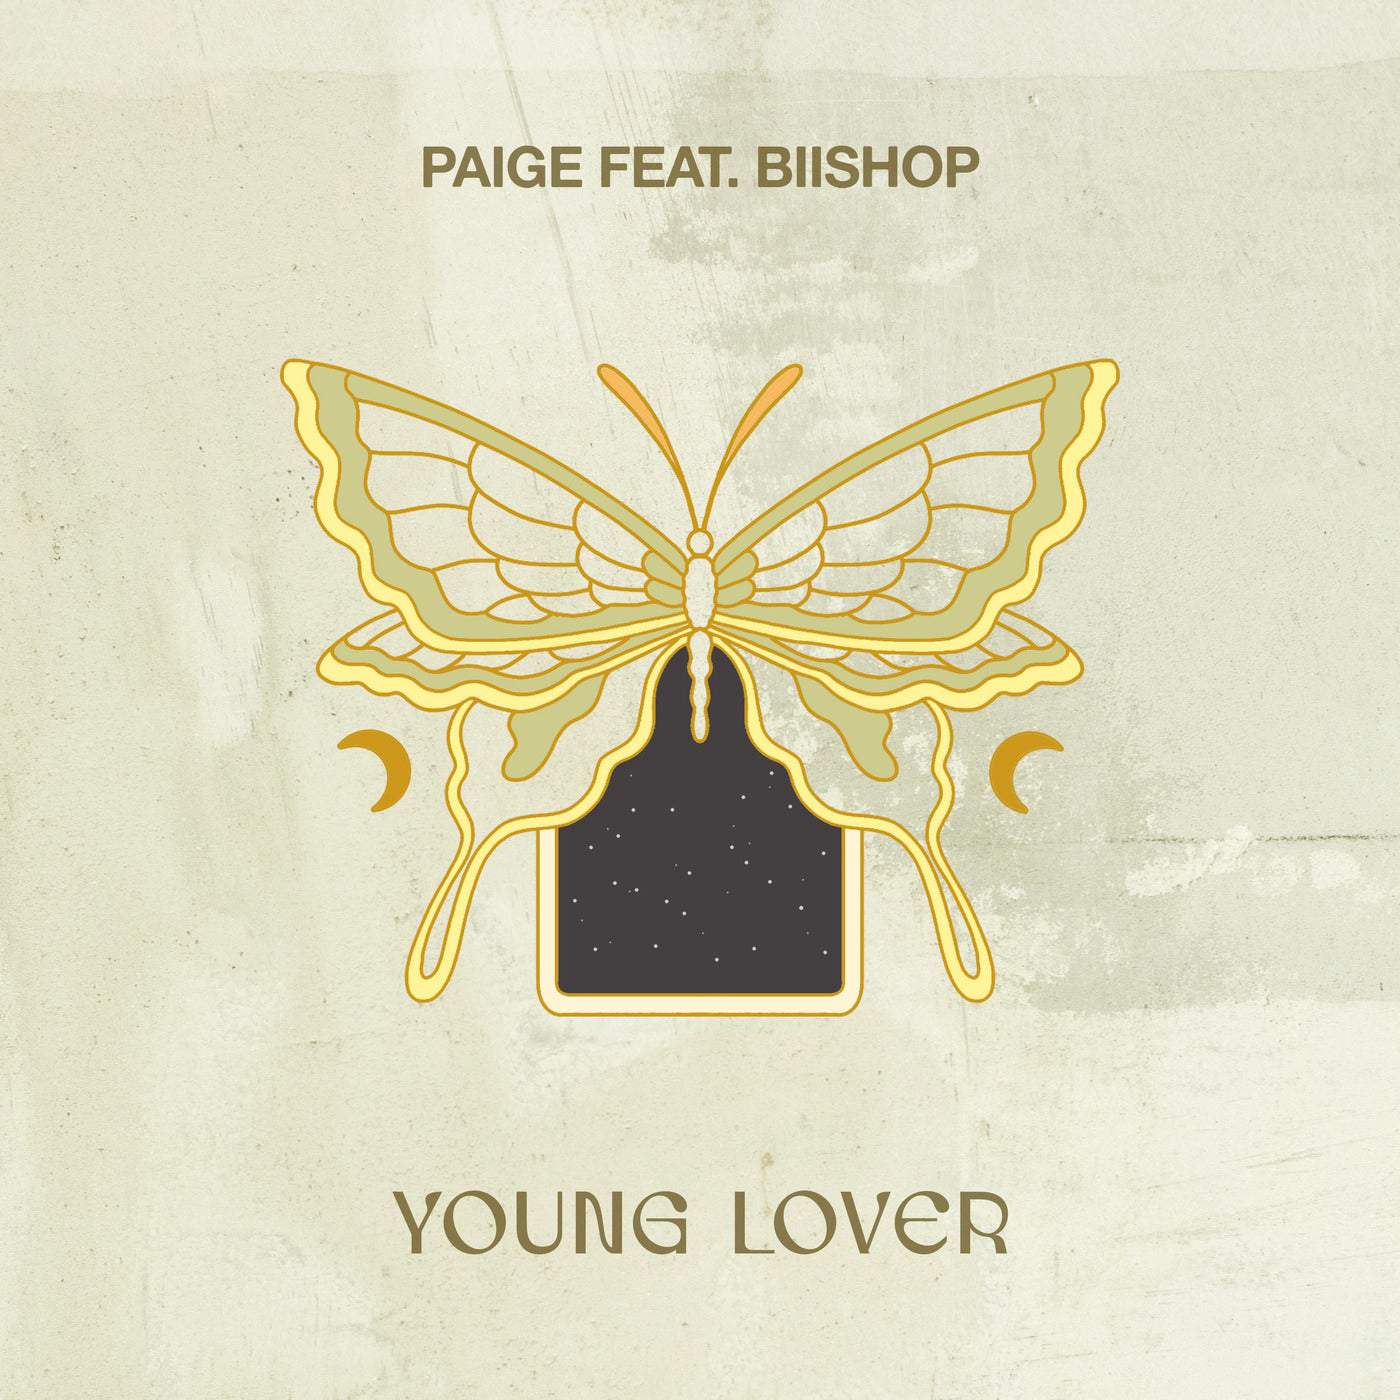 image cover: Paige, Biishop - Young Lover on LUSH SUNDAY